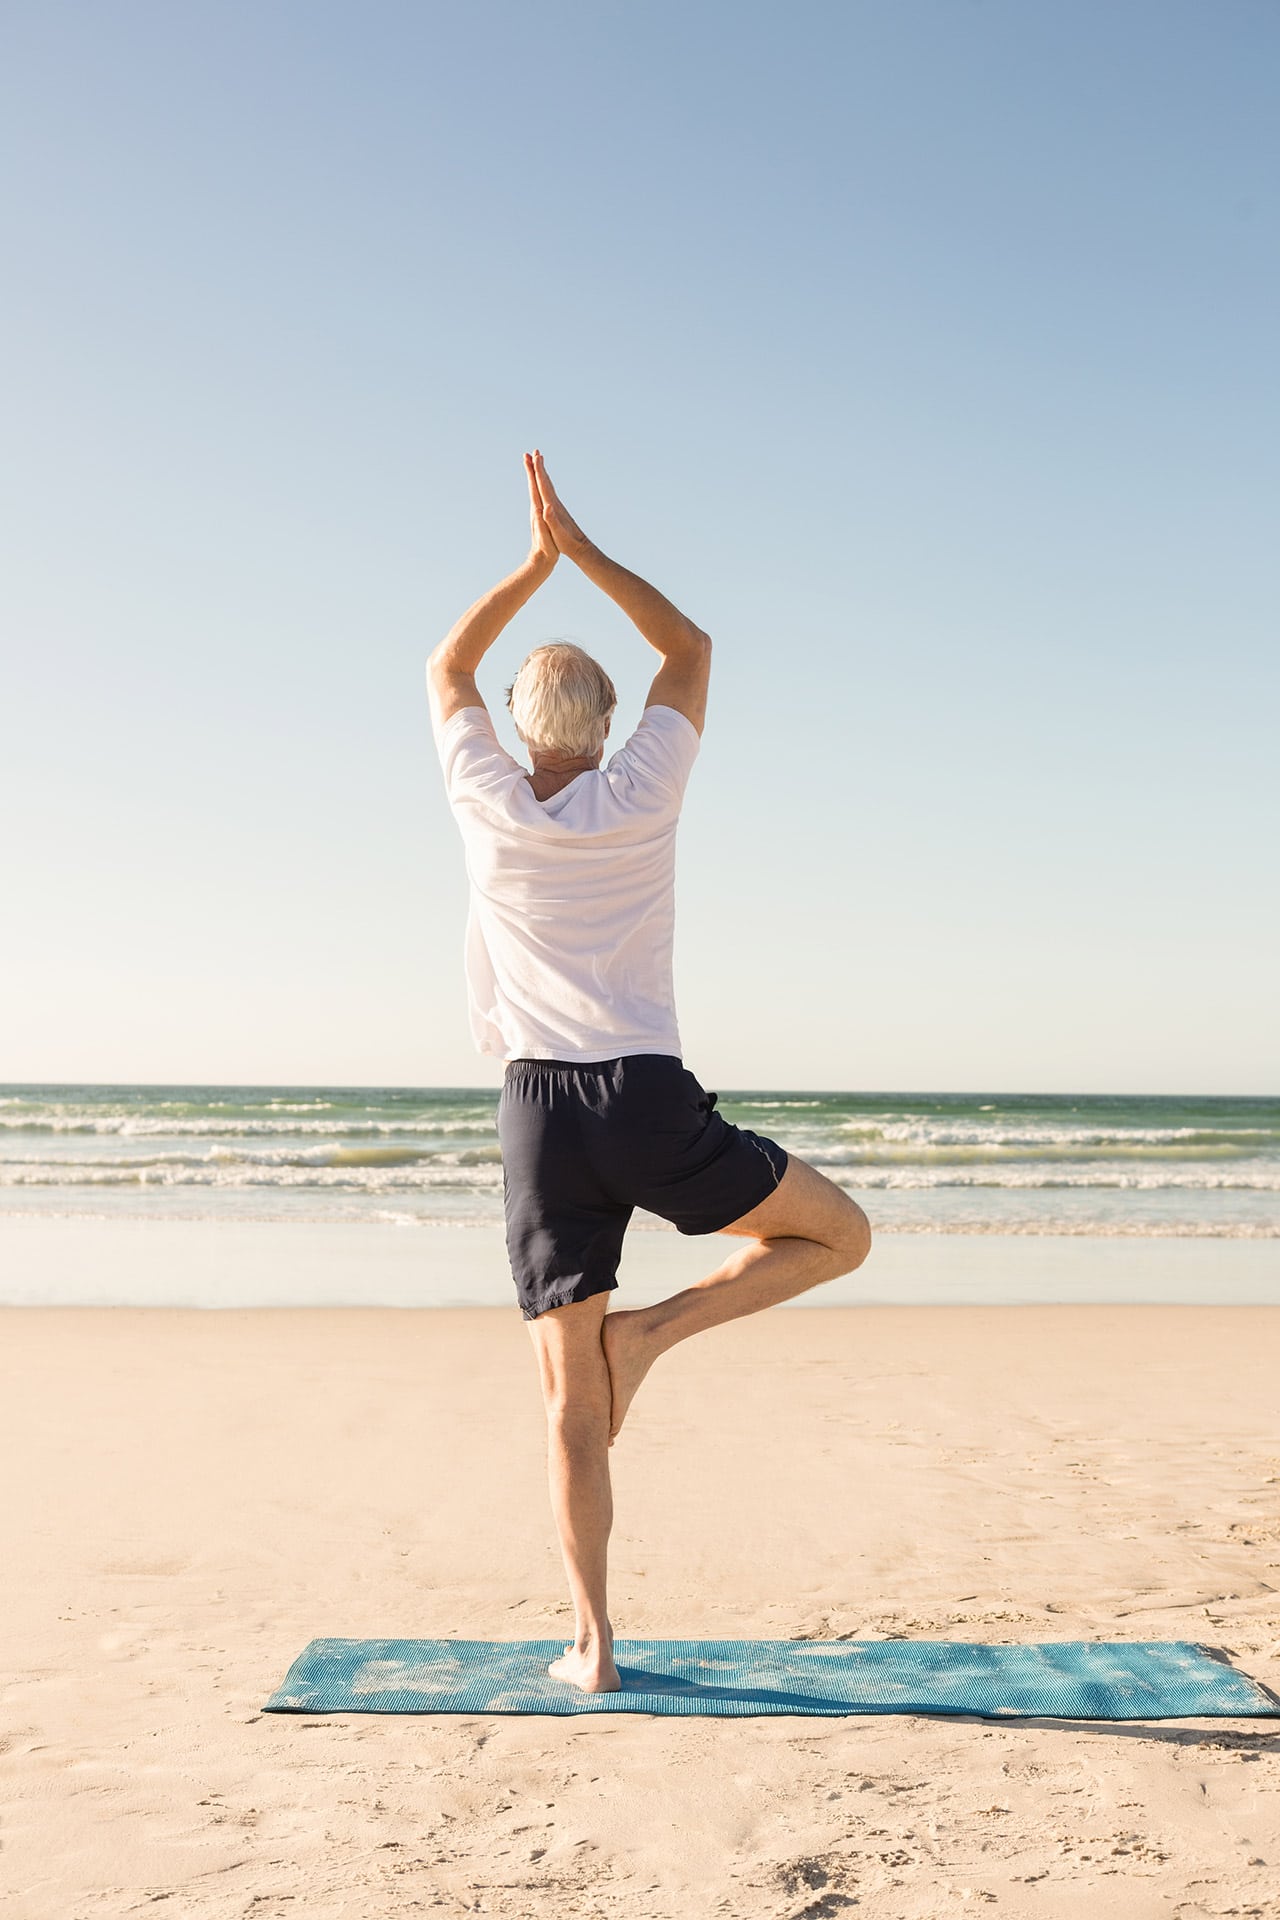 Photo of a person balancing on one leg in a yoga pose on the beach